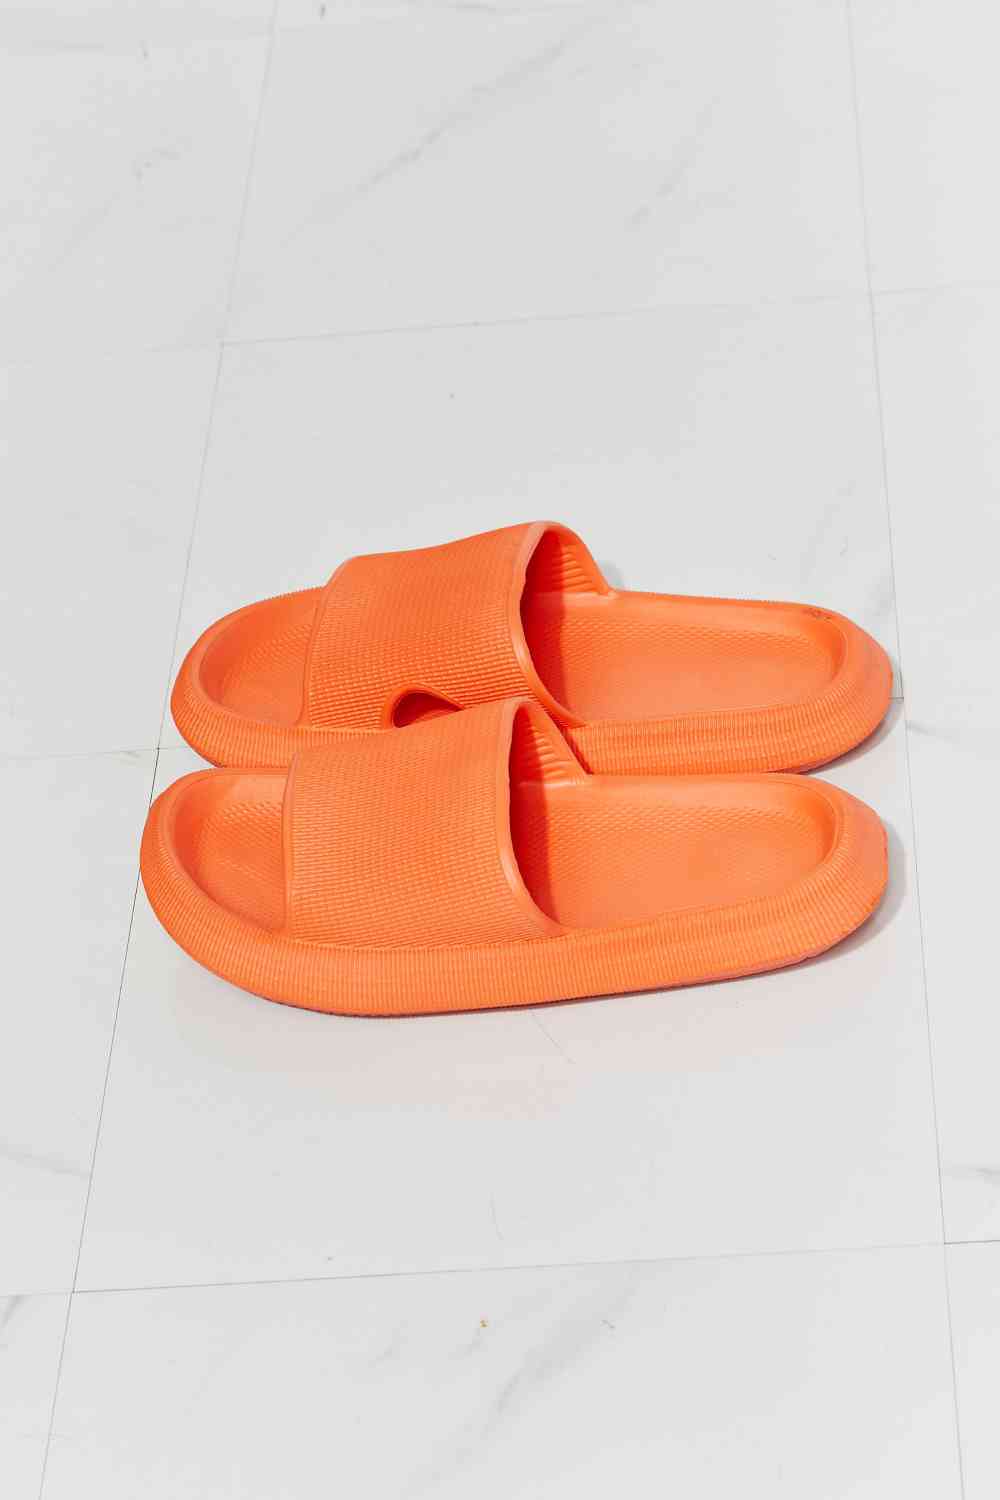 Arms Around Me Open Toe Slide in Orange - Accessories - Shoes - 5 - 2024